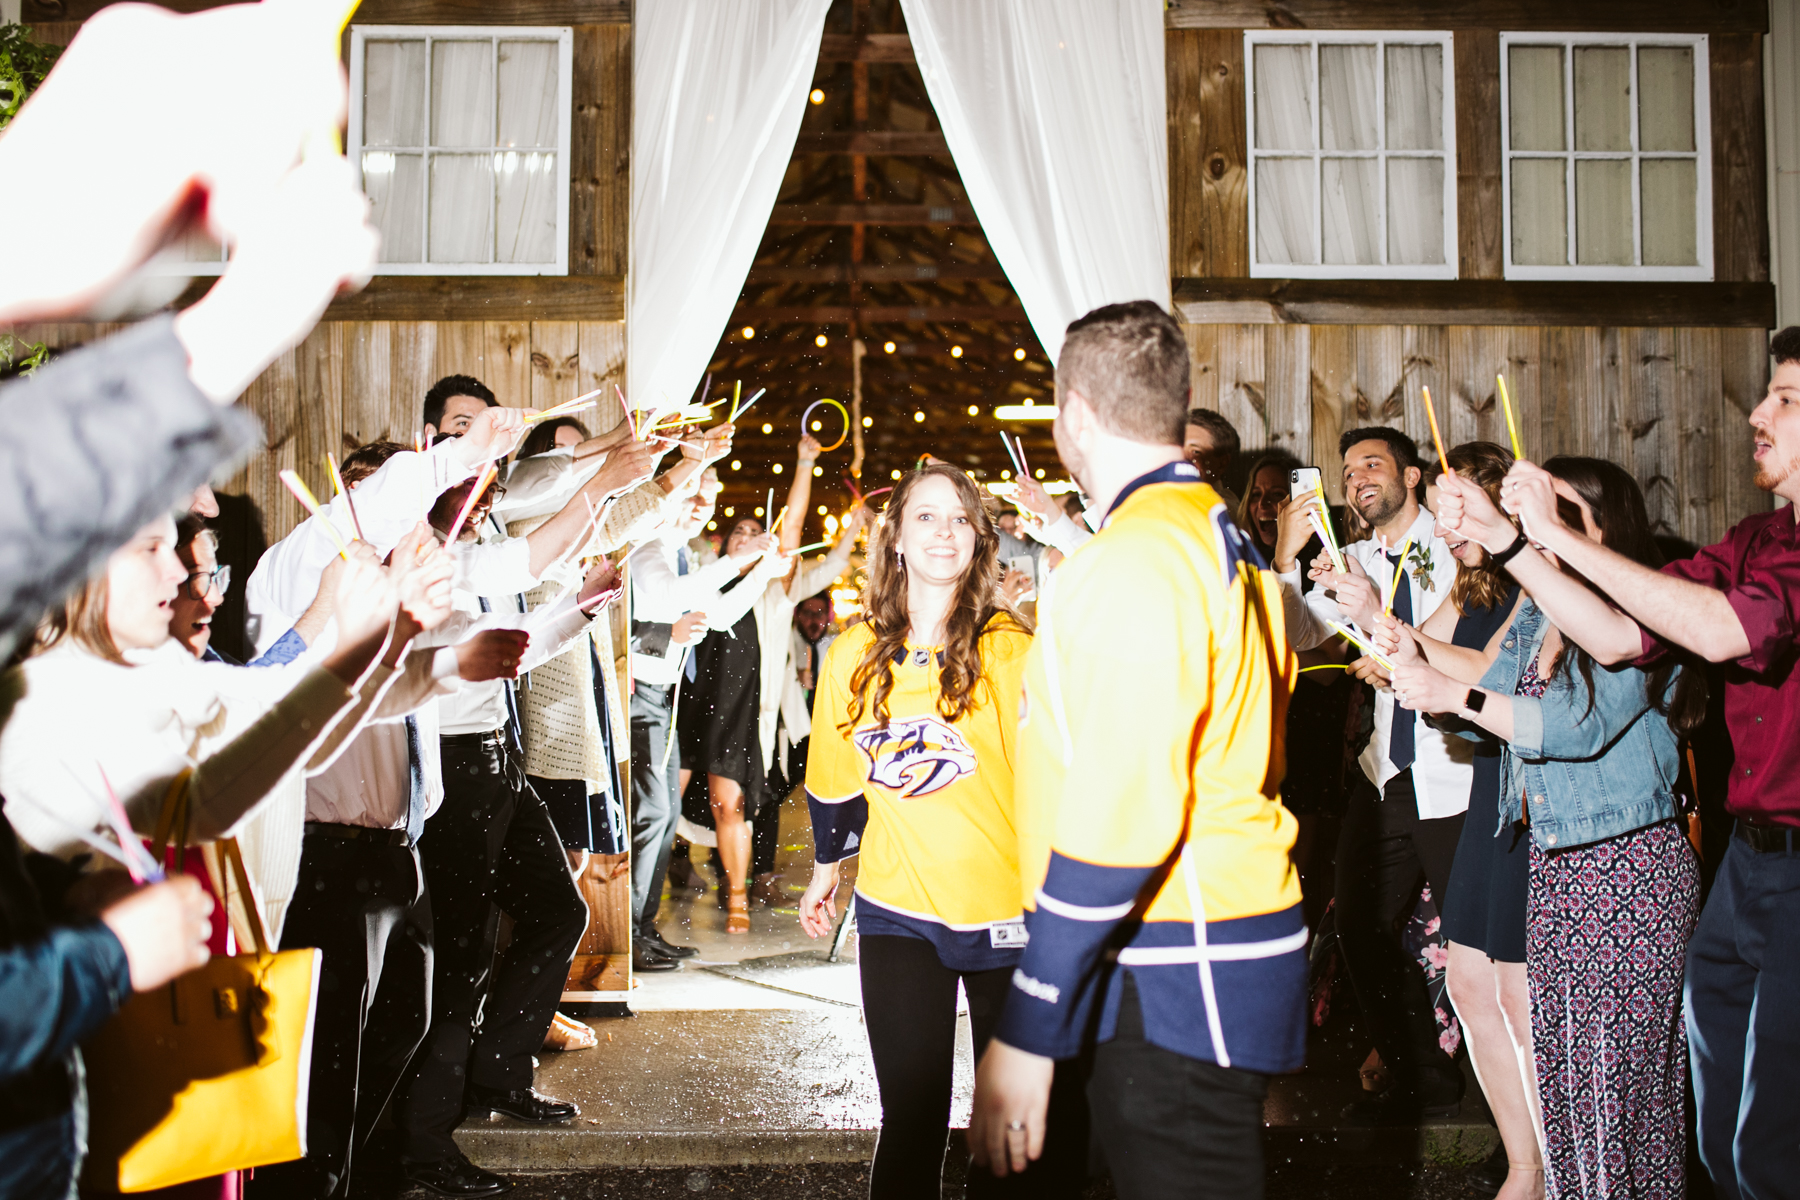 A Nashville predators themed Glow stick exit after a rustic wedding at Barn in the Bend in Nashville, Tennessee